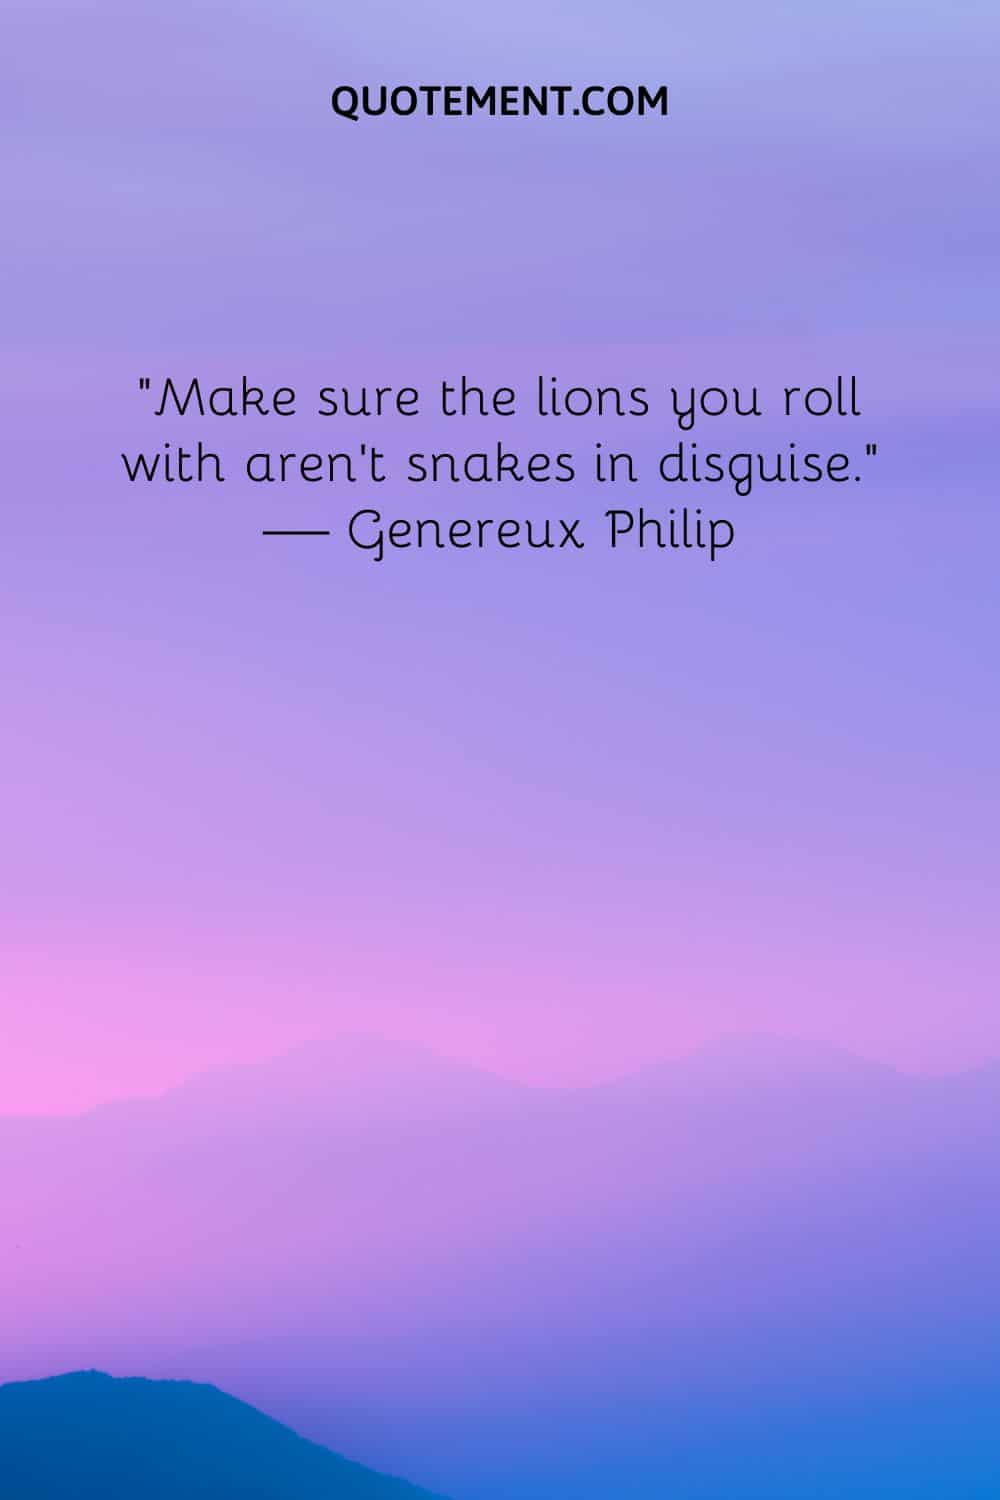 Make sure the lions you roll with aren’t snakes in disguise